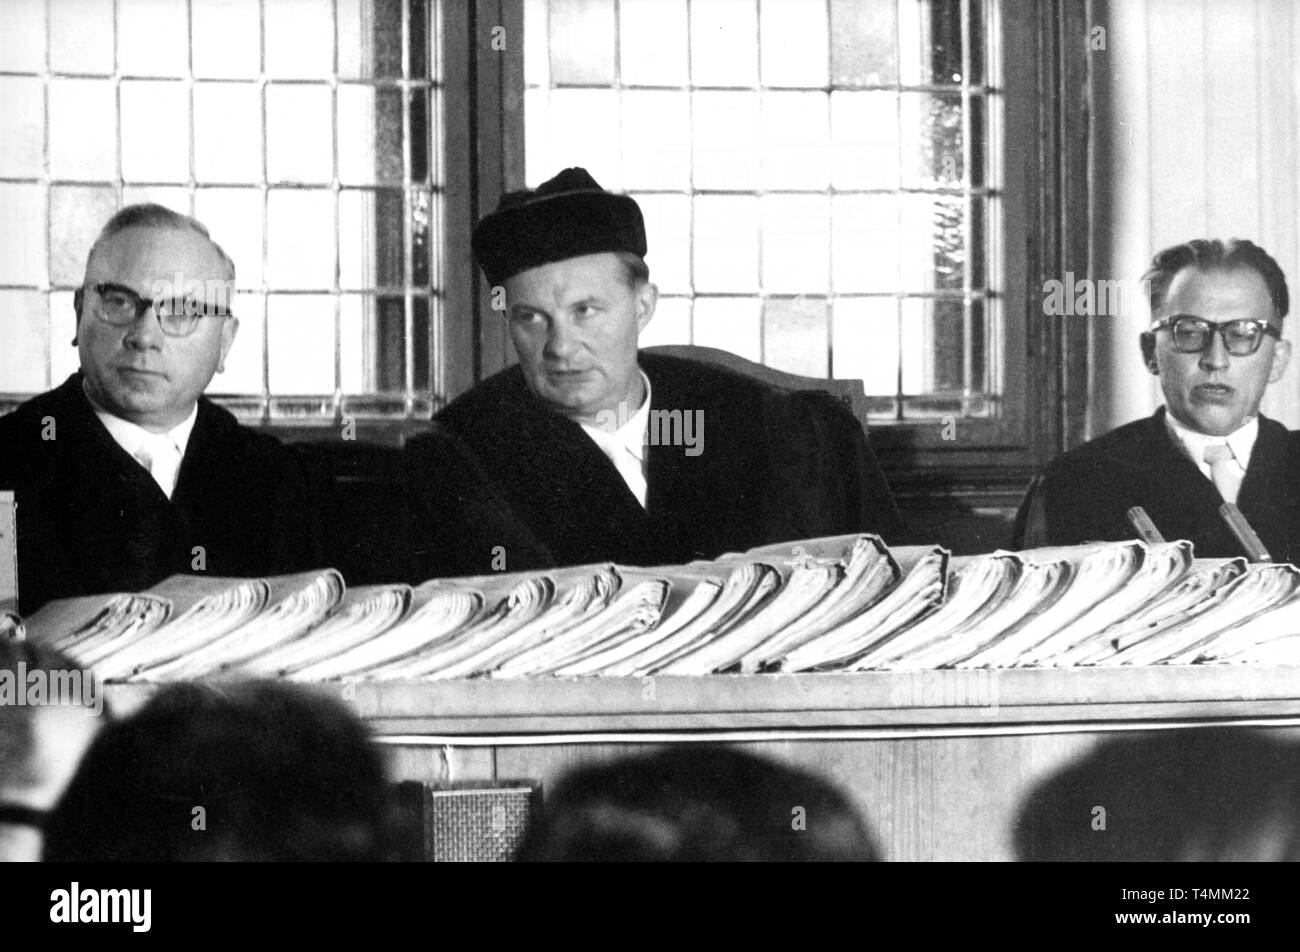 Chief judge Schröber (M). On 13 October 1958 trial was opened in Bonn (Germany) against former guards of the concentration camp Sachsenhausen Wilhelm Schubert and Gustav Sorge (not shown). | usage worldwide Stock Photo